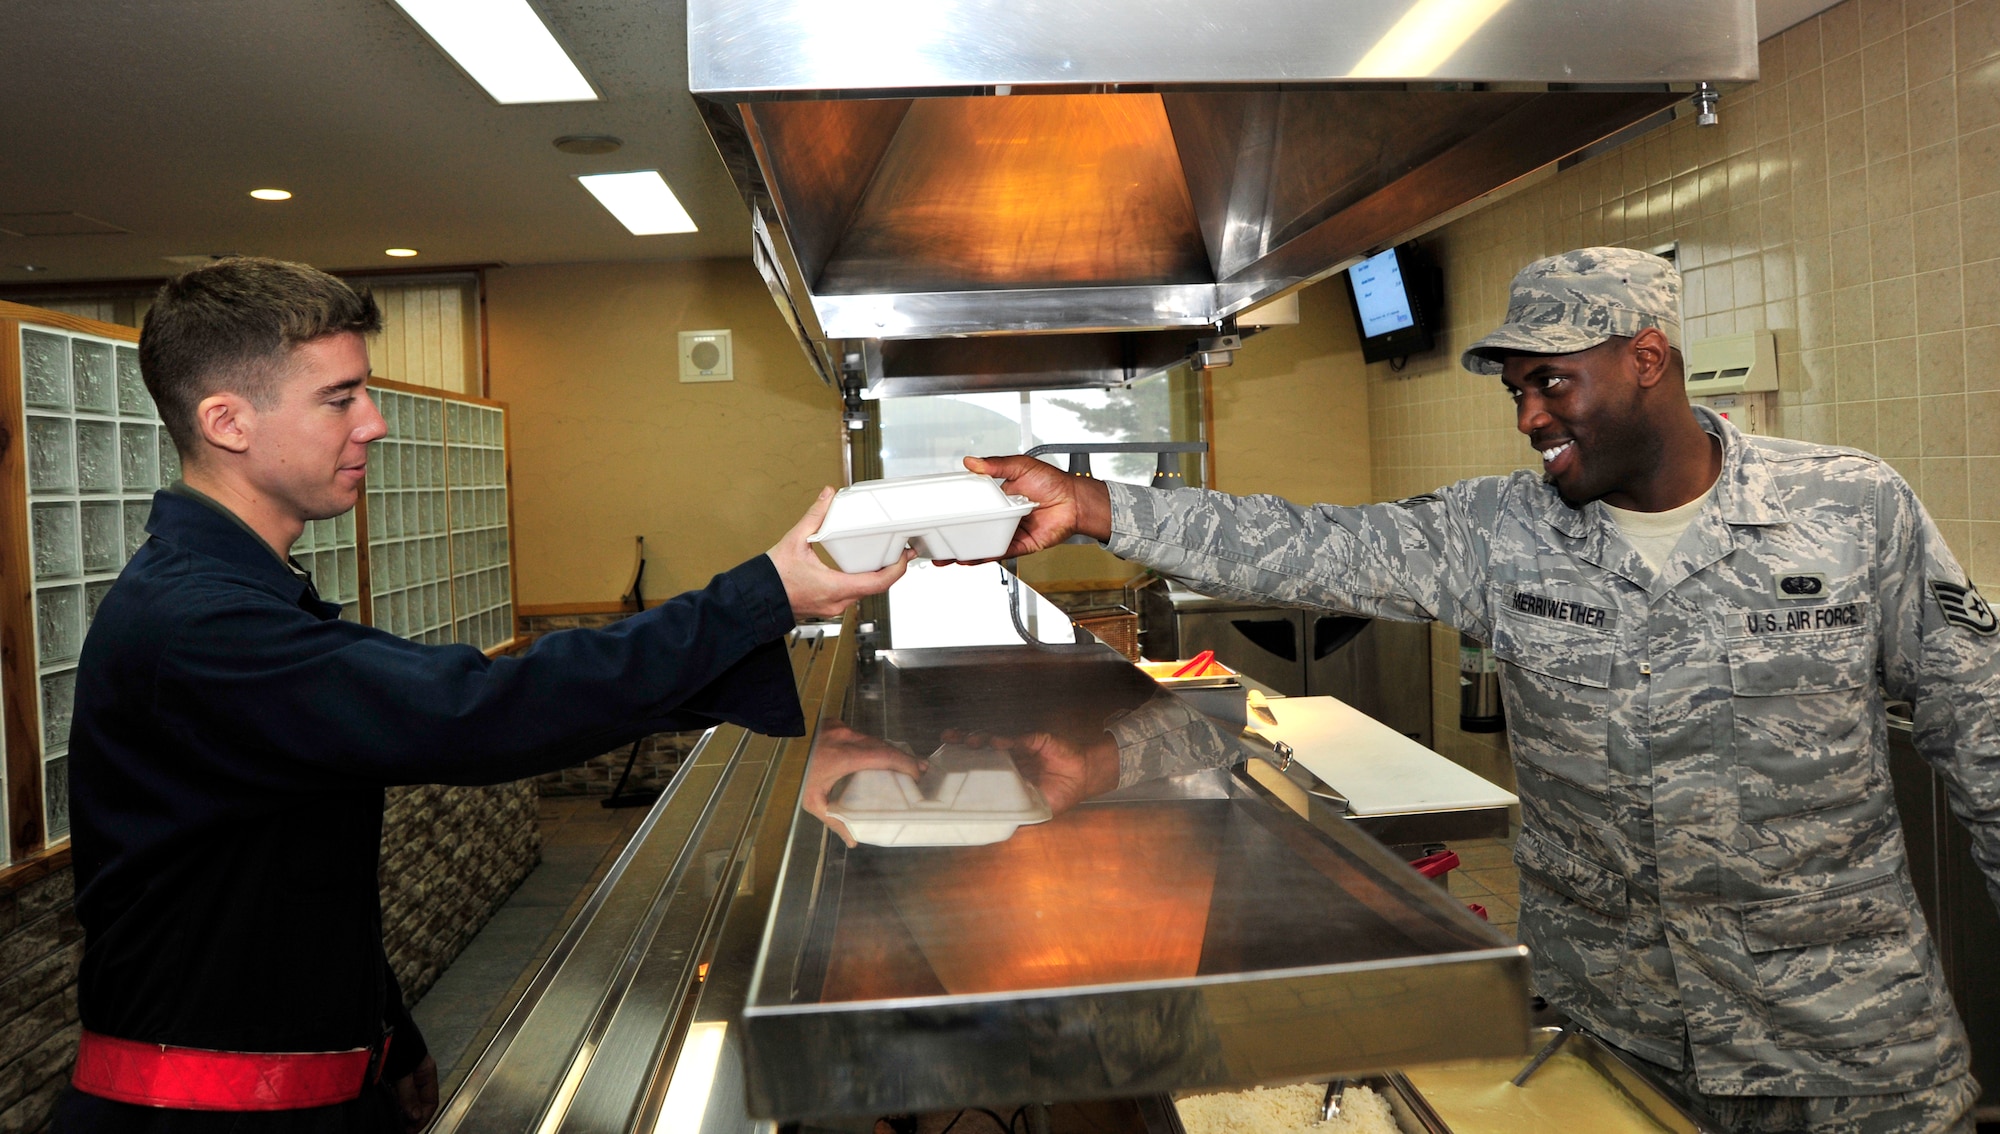 MISAWA AIR BASE, Japan – U.S. Air Force Senior Airman Skyler Rothganger, 14th Air Maintenance Unit, takes a quick break from fixing jets to grab a to go plate from Staff Sgt. Reid Merriwether, 35th Force Support Squadron Food Service Technician, at the Falcon Feeder dining facility during an operational readiness exercise here Nov. 6. The 35th Fighter Wing is currently going through an ORE in preparation for an operational readiness inspection in December. (U.S. Air Force photo/Staff Sgt. Nathan Lipscomb)